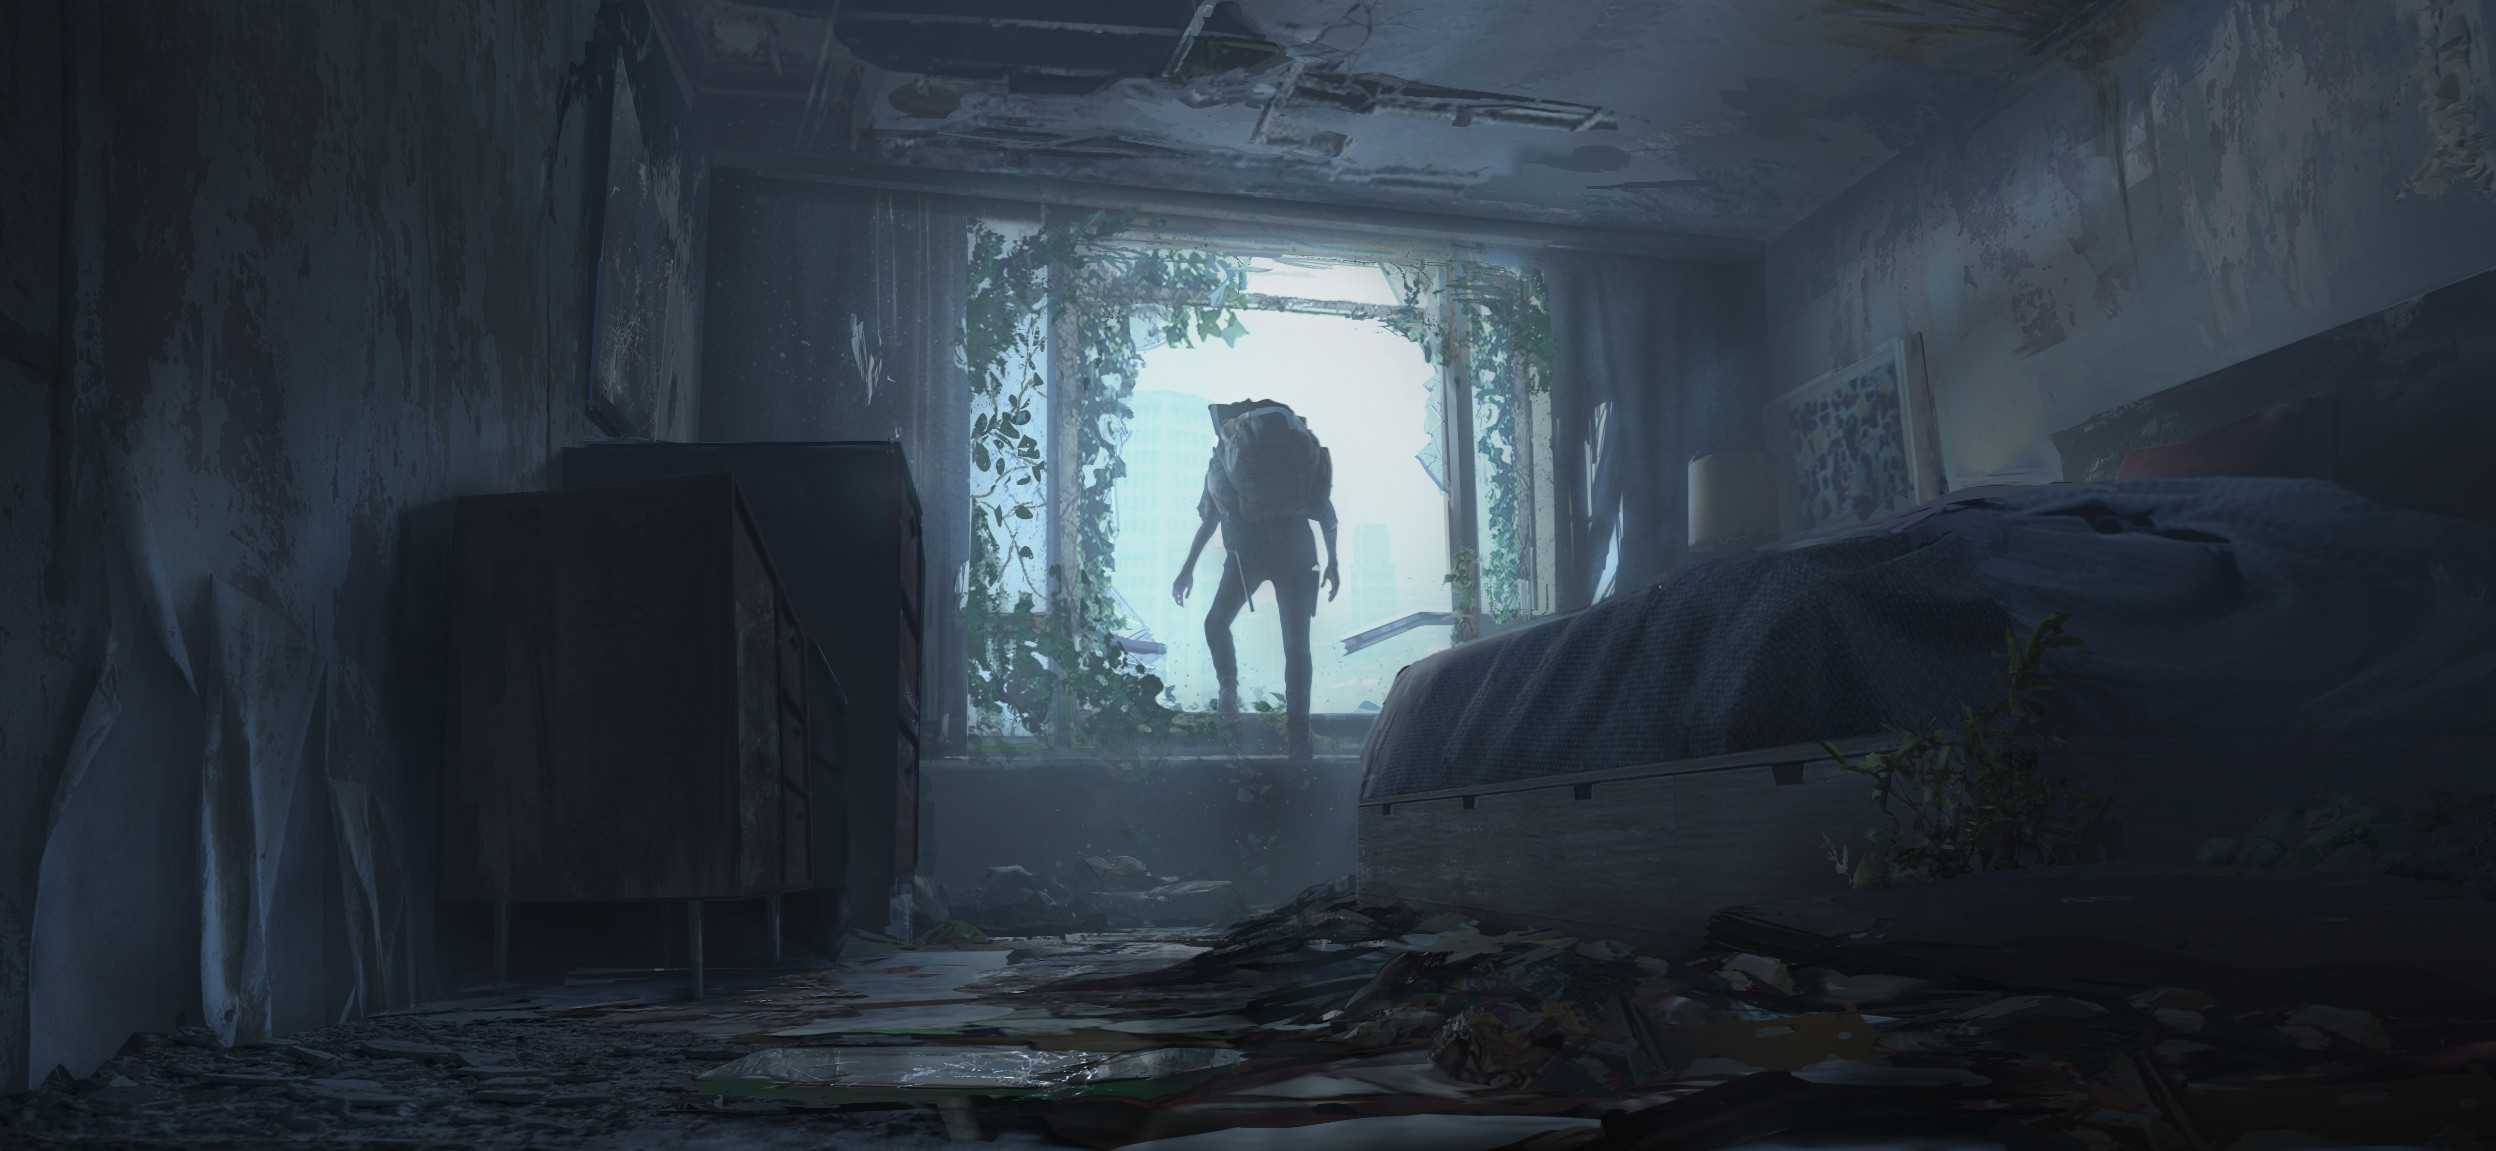 The Last of Us' Multiplayer Concept Art Appears To Prove Major Fan Theory